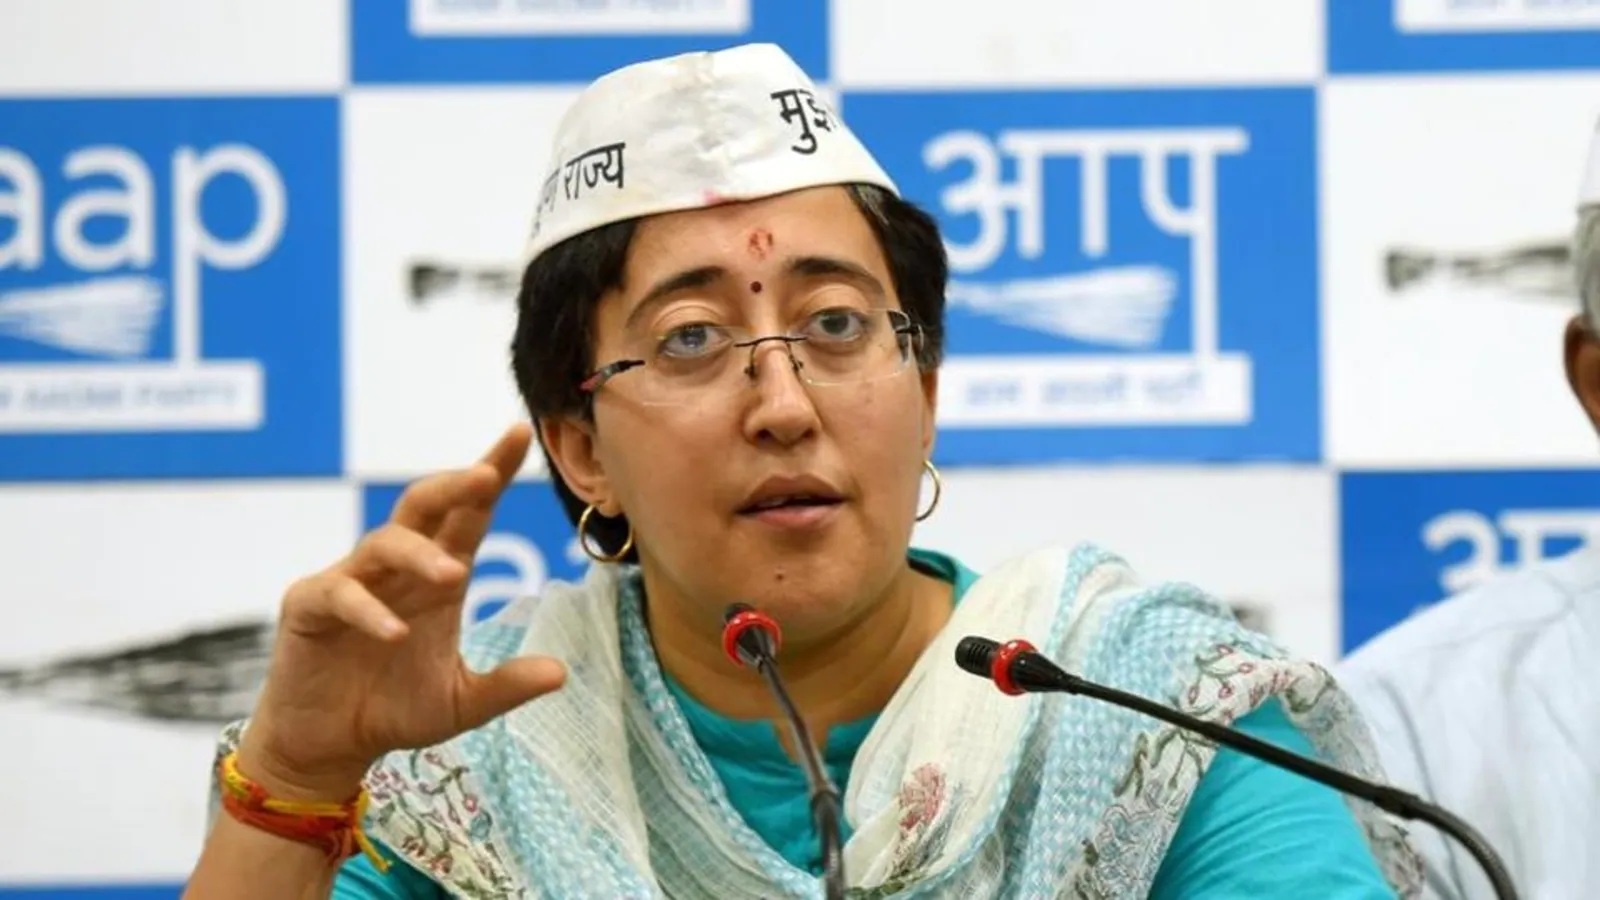 Center will demolish four temples in Delhi, claimed AAP leader Atishi